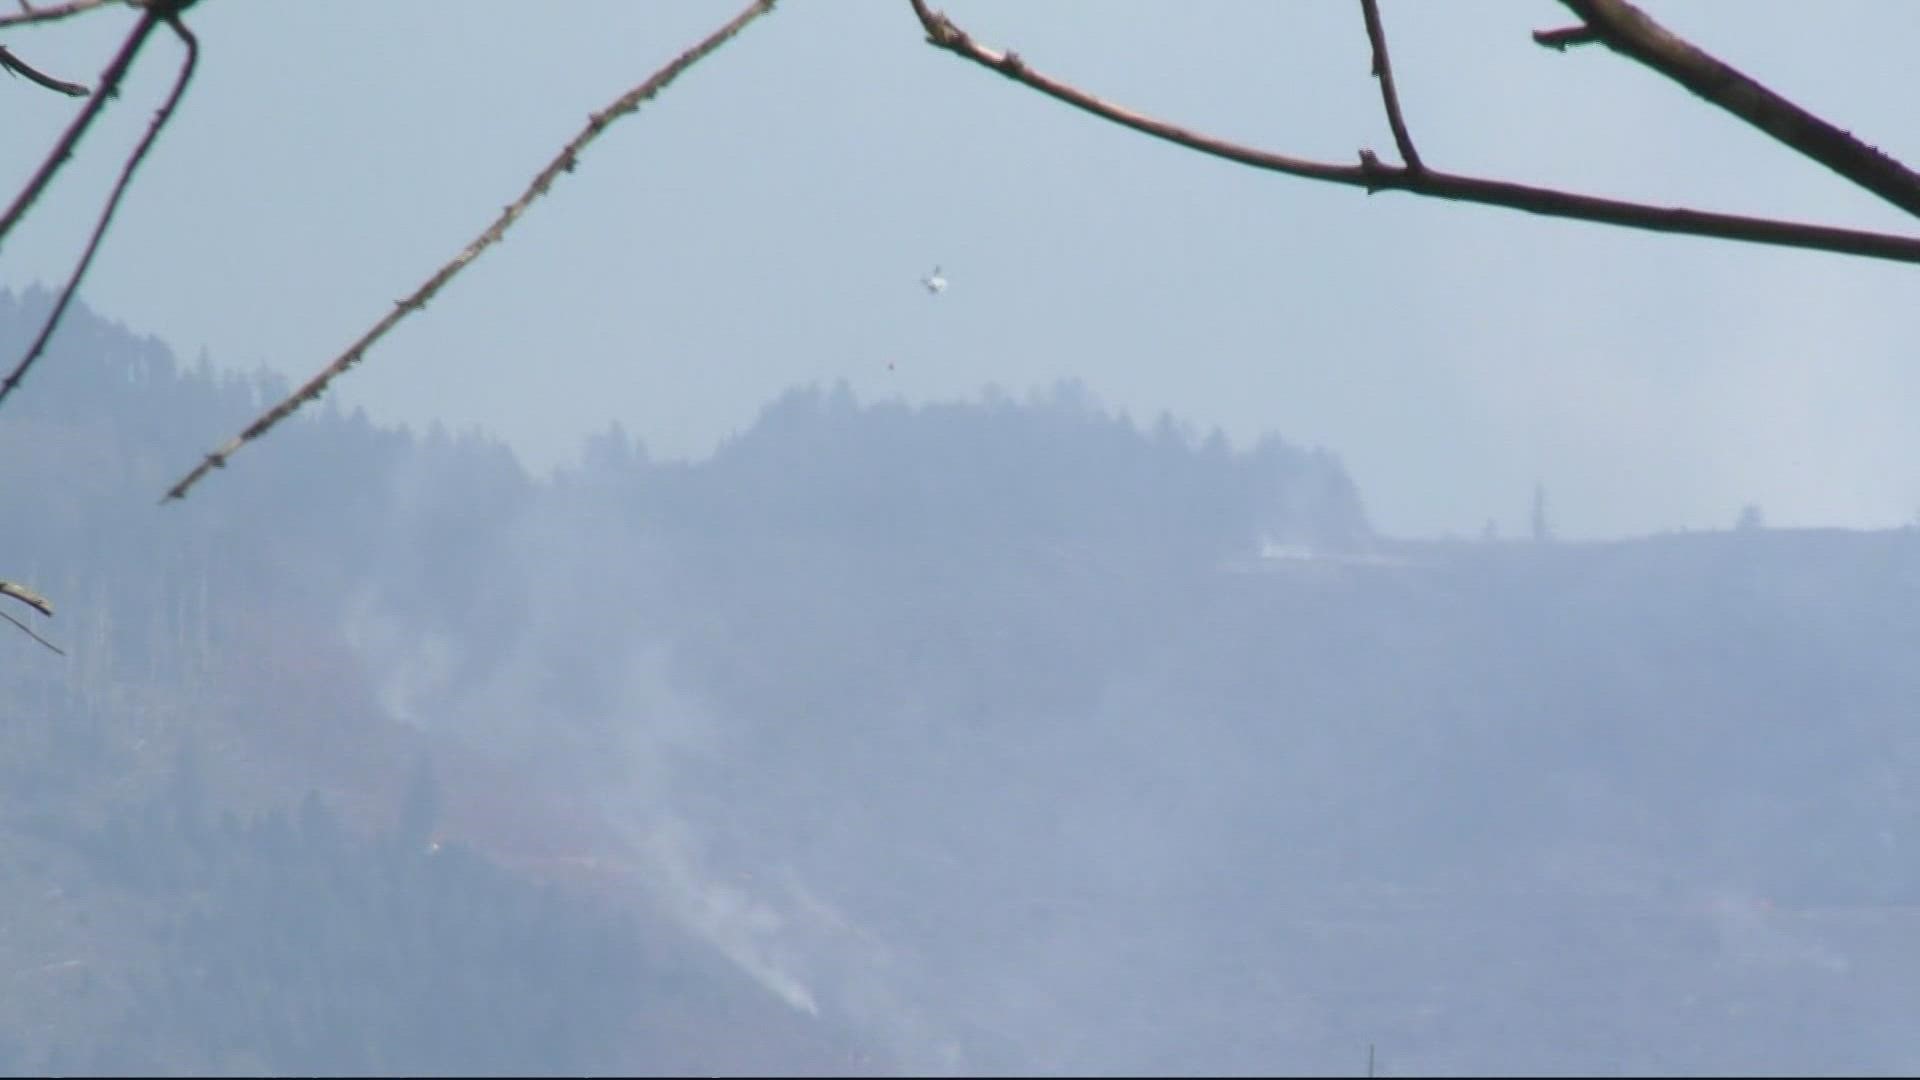 The fire is burning near Larch Mountain, outside of Washougal. About 110 homes near the fire are 
under Level 1 "Be Ready" and Level 2 "Get Set" evacuation orders.